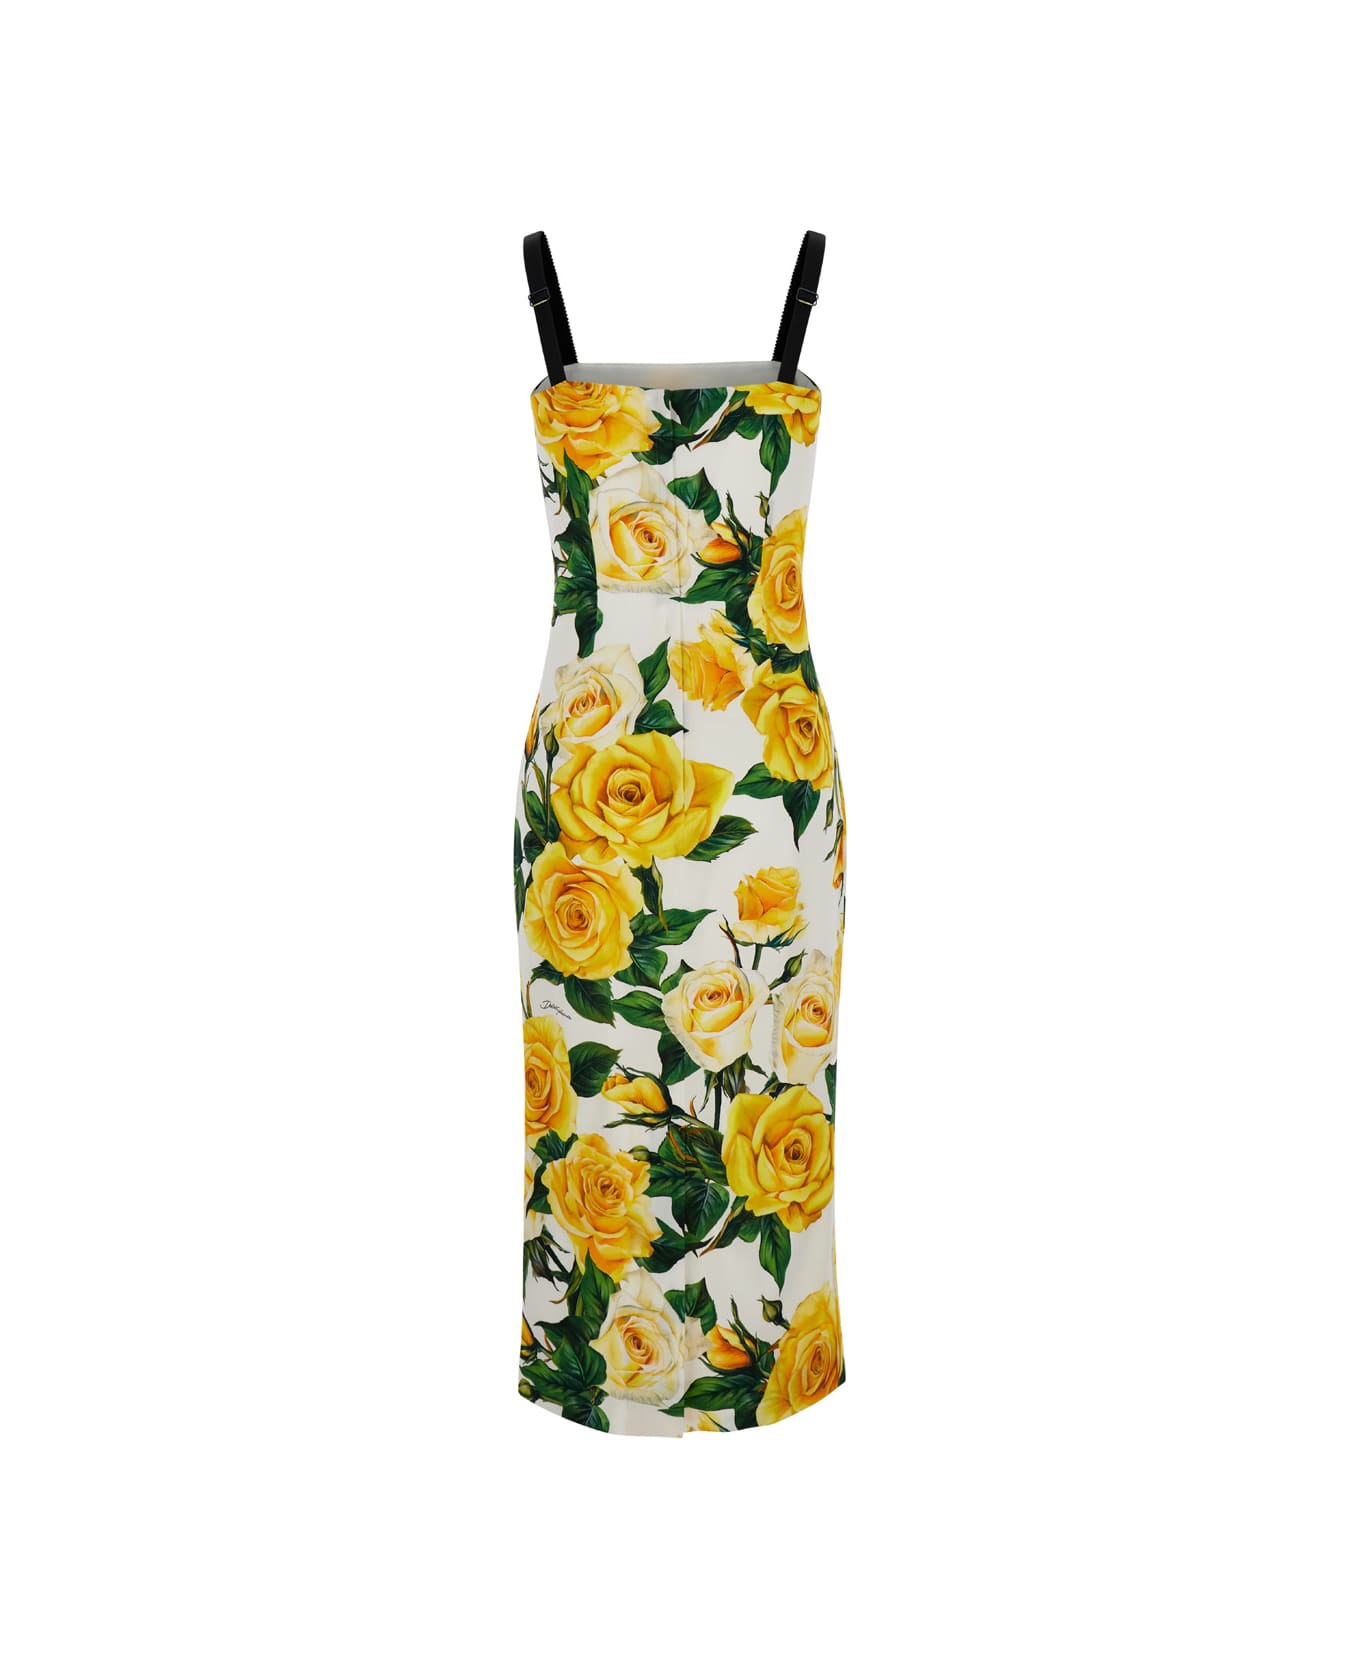 Dolce & Gabbana Midi Dress With All-over Flower Print - Rose gialle fdo bco